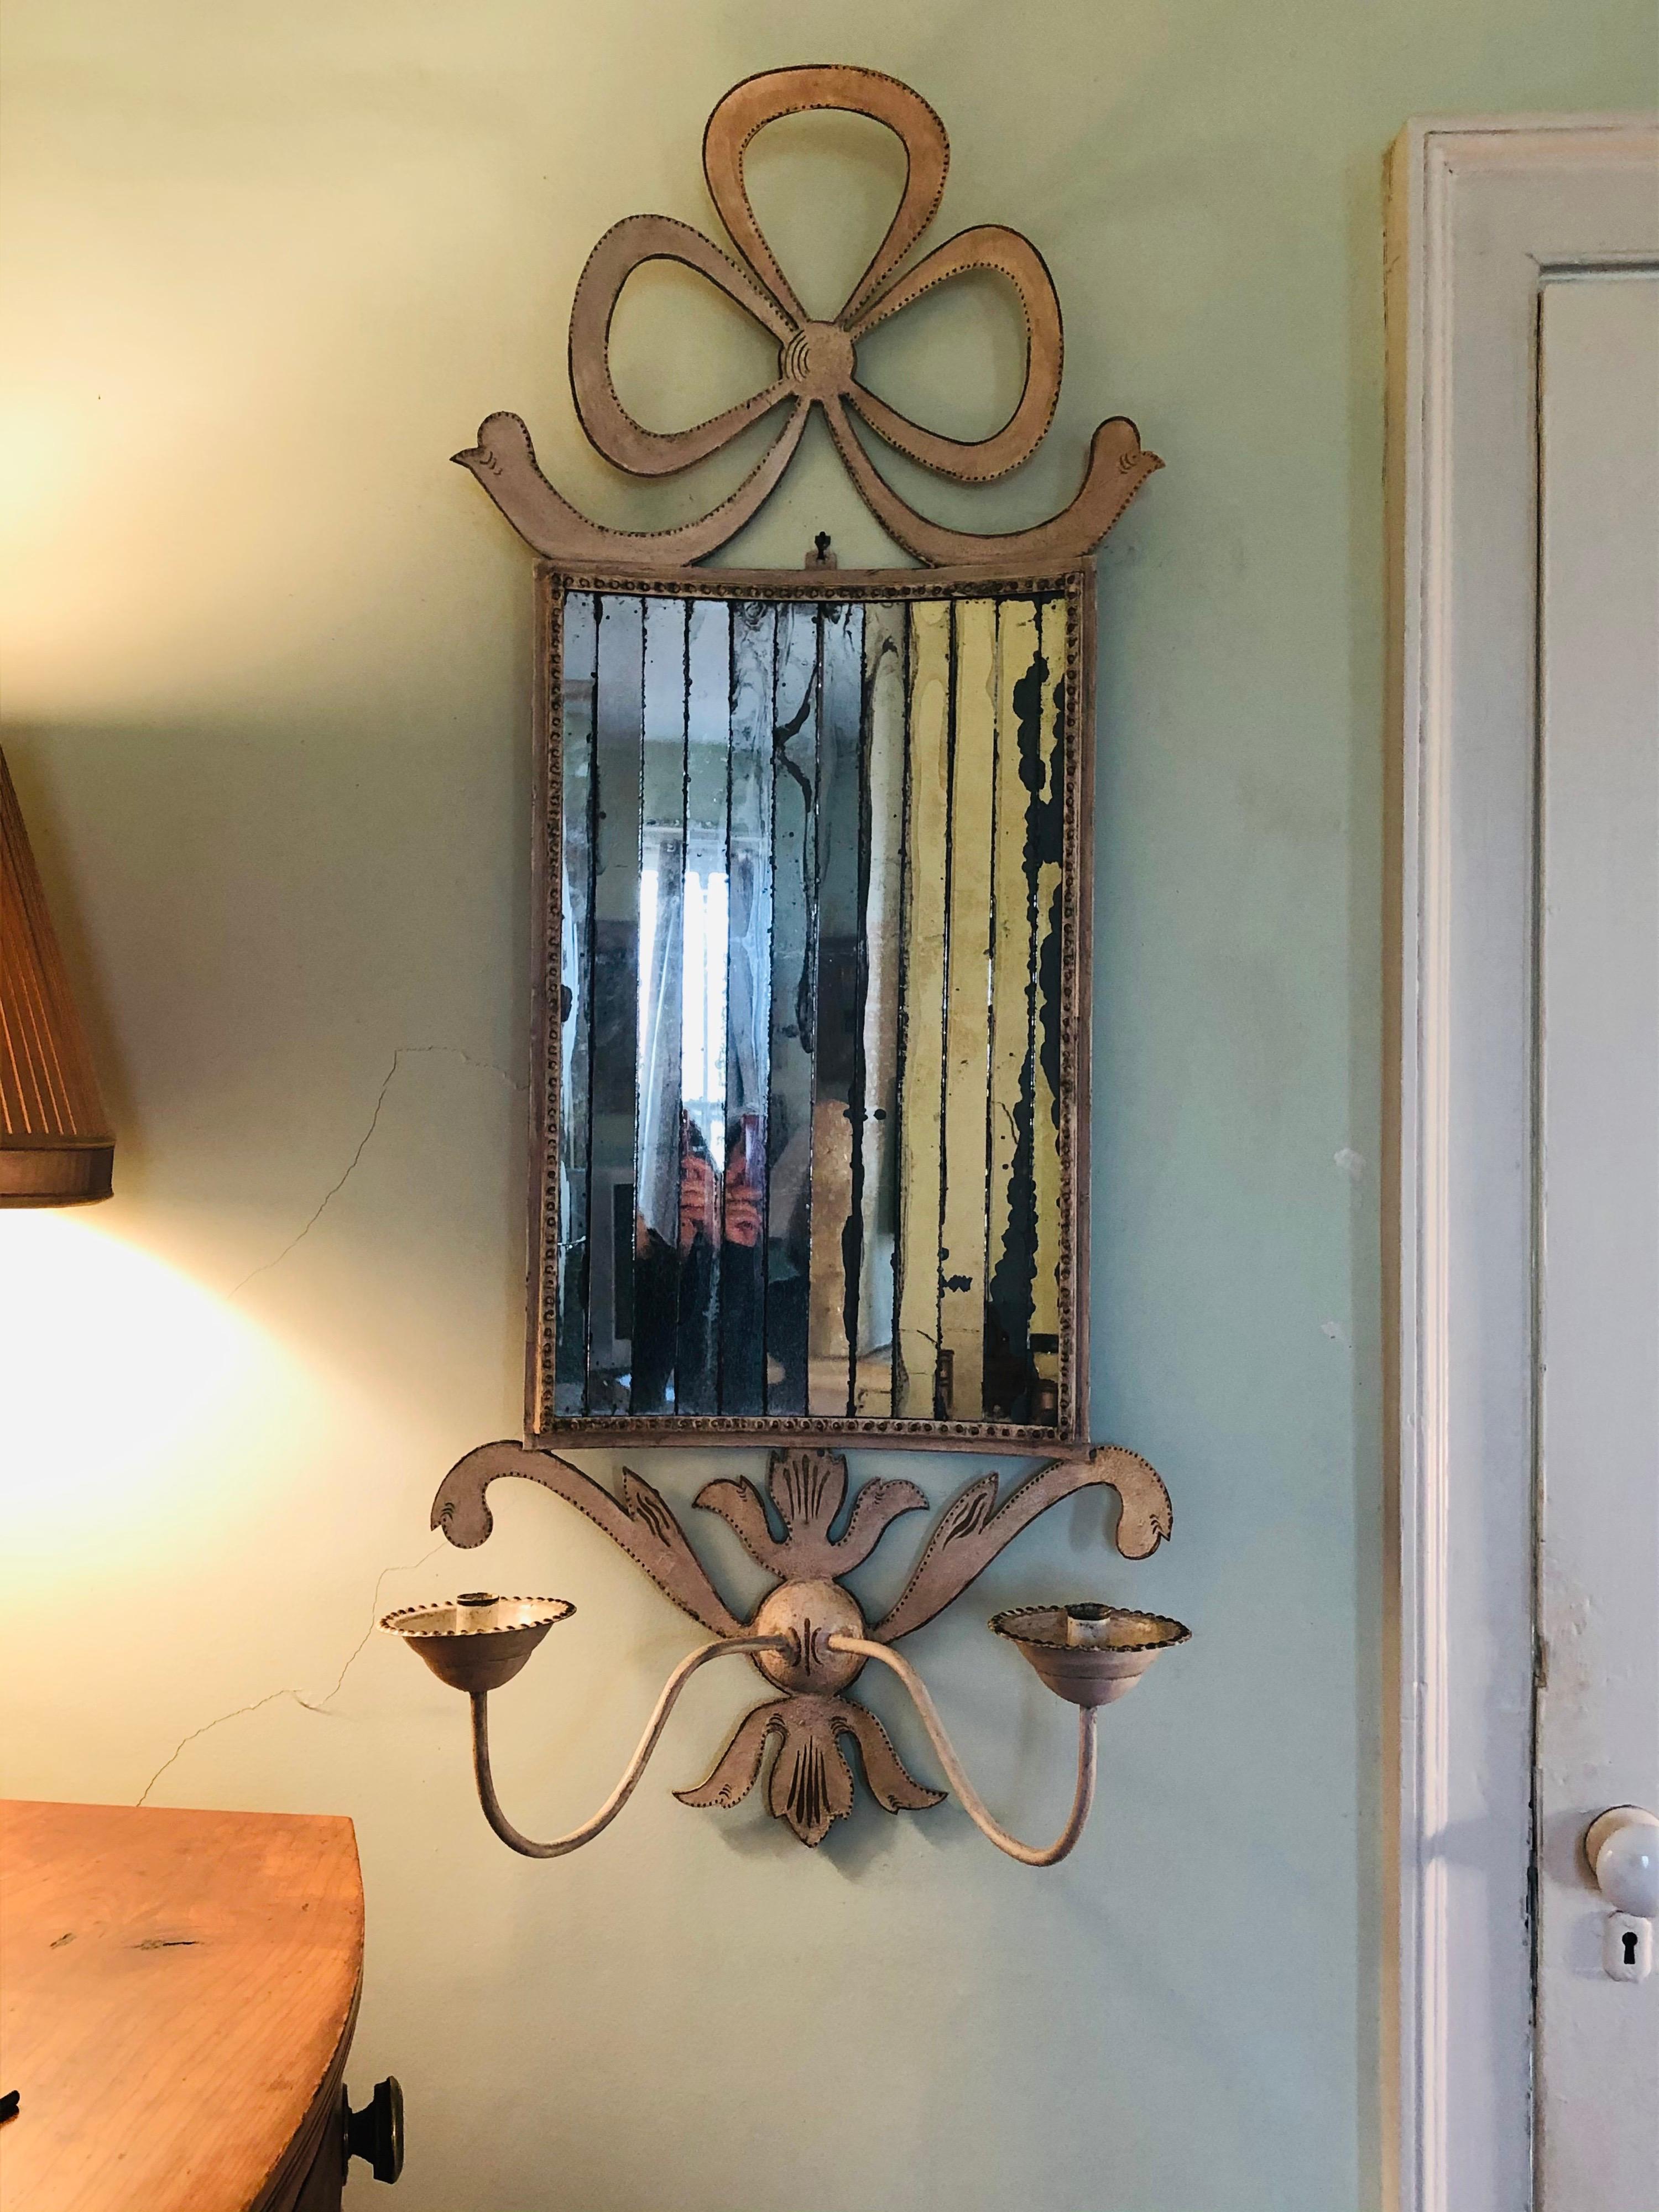 Stylish white painted tole and mirrored two-light sconce or candleholder. White paint with gold paint details. Probably English. A little loss to the mirror but gives a nice overall patina to the glass. Really a handsome piece for any wall.